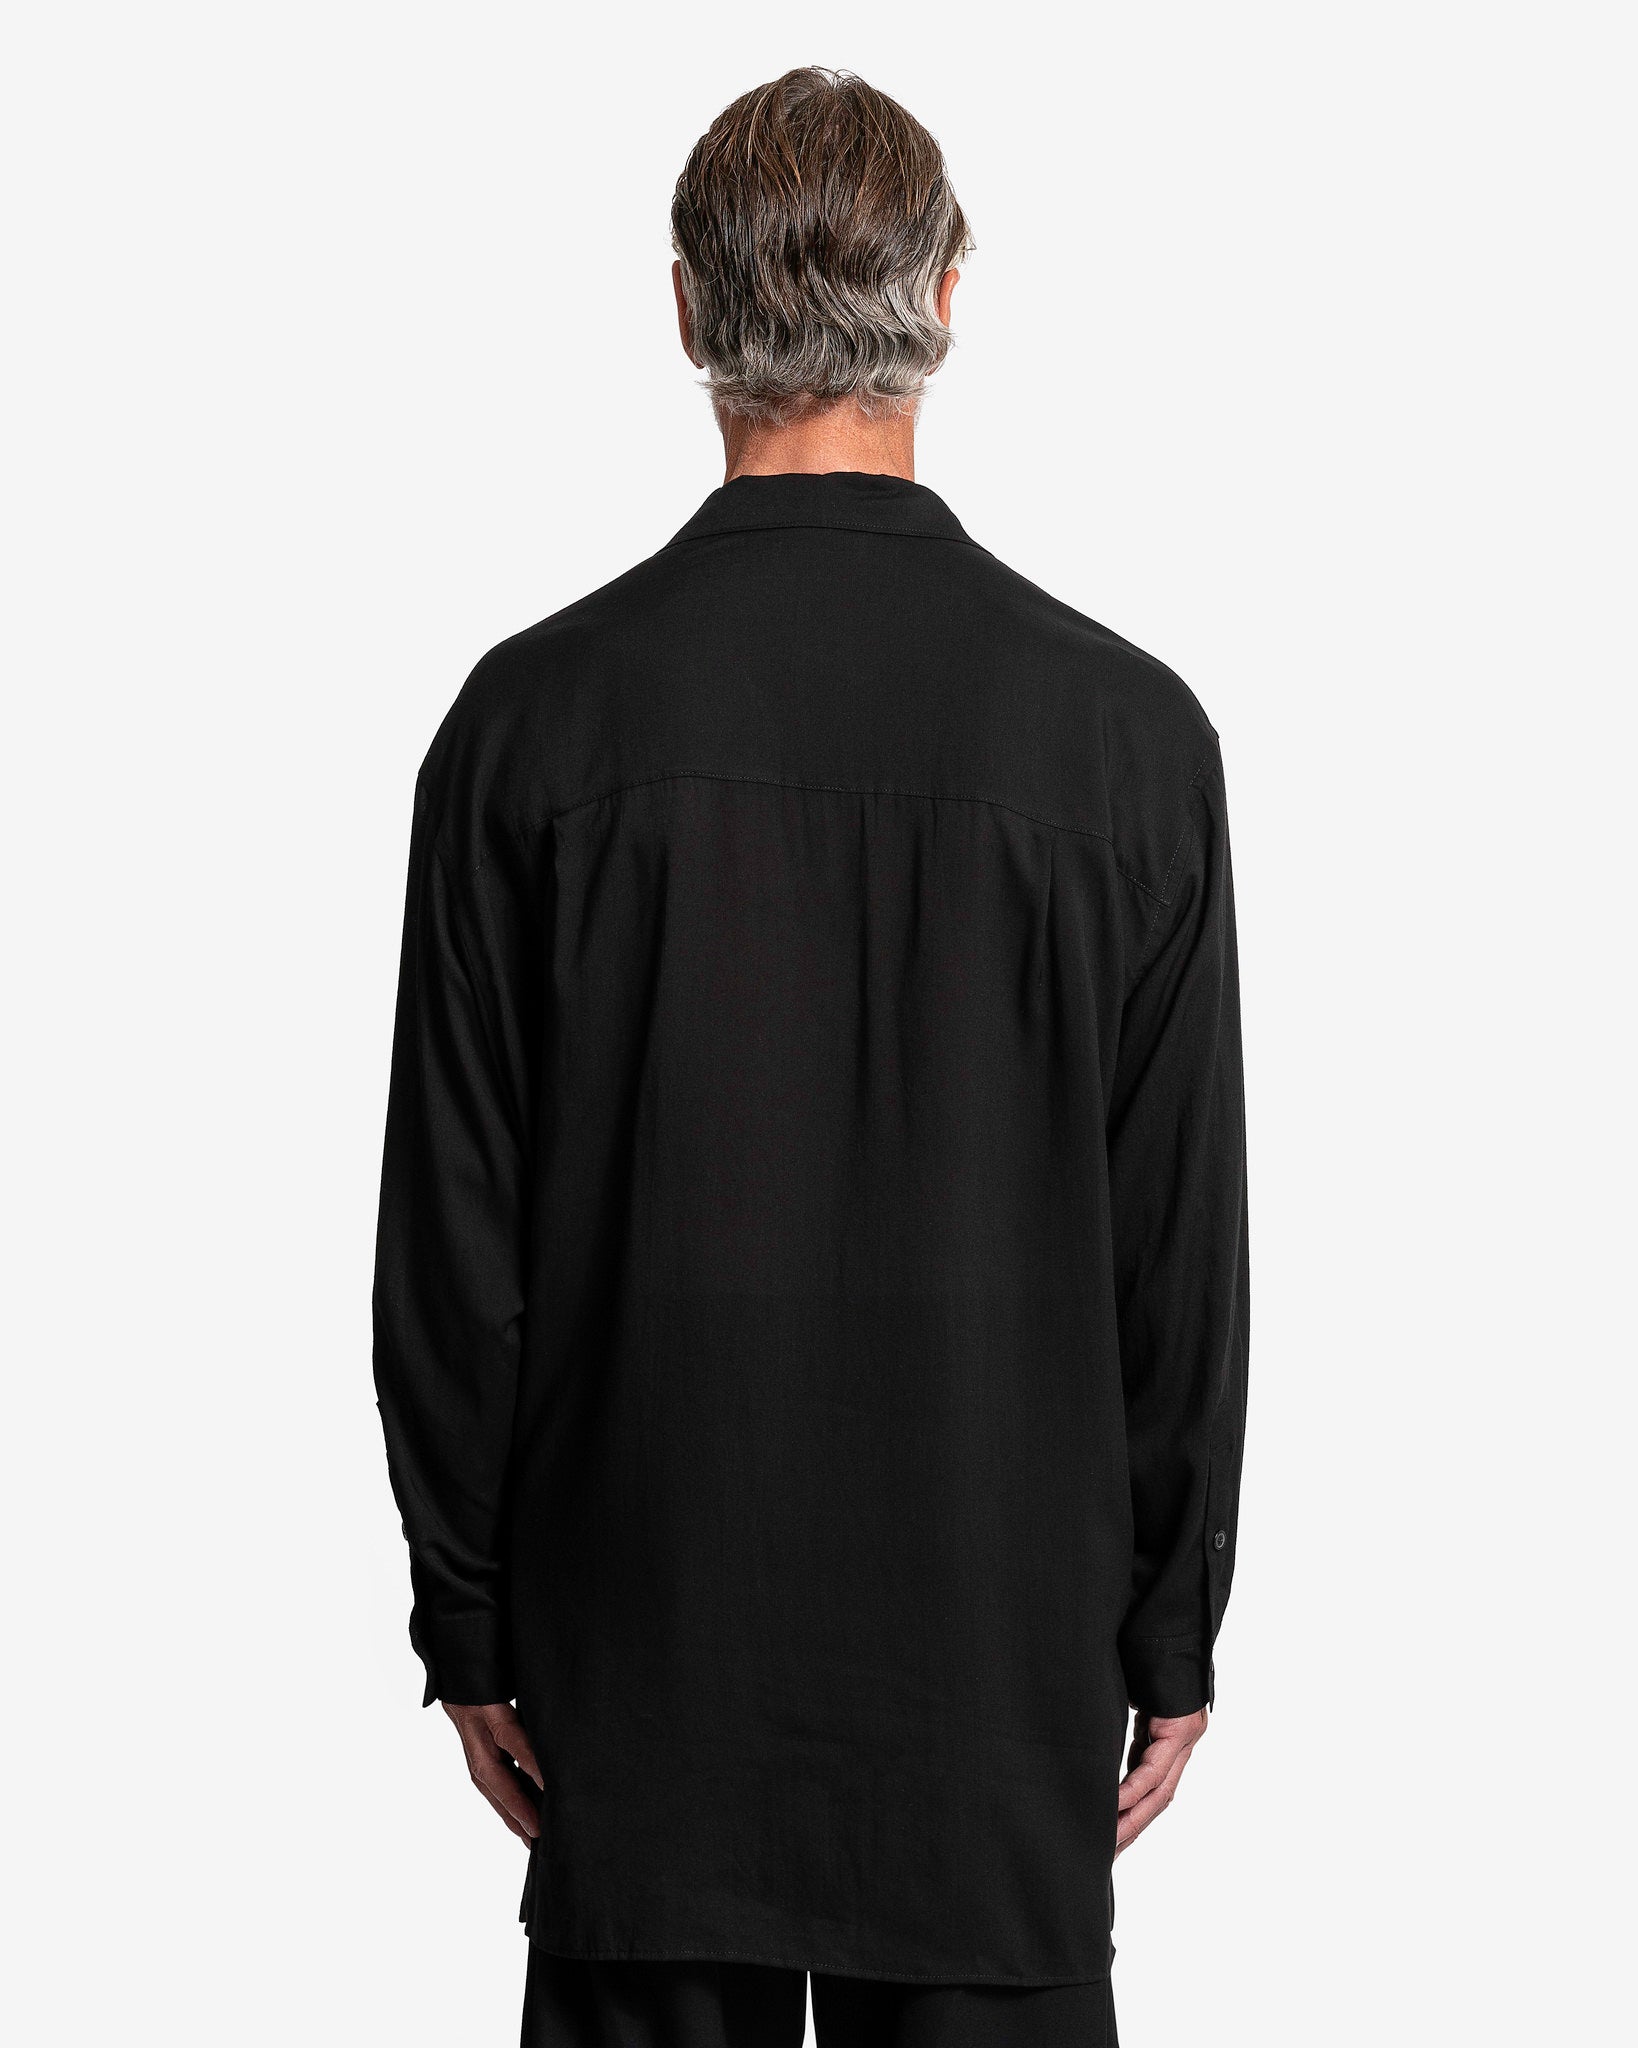 Open Collar Shirt with Chin Flap